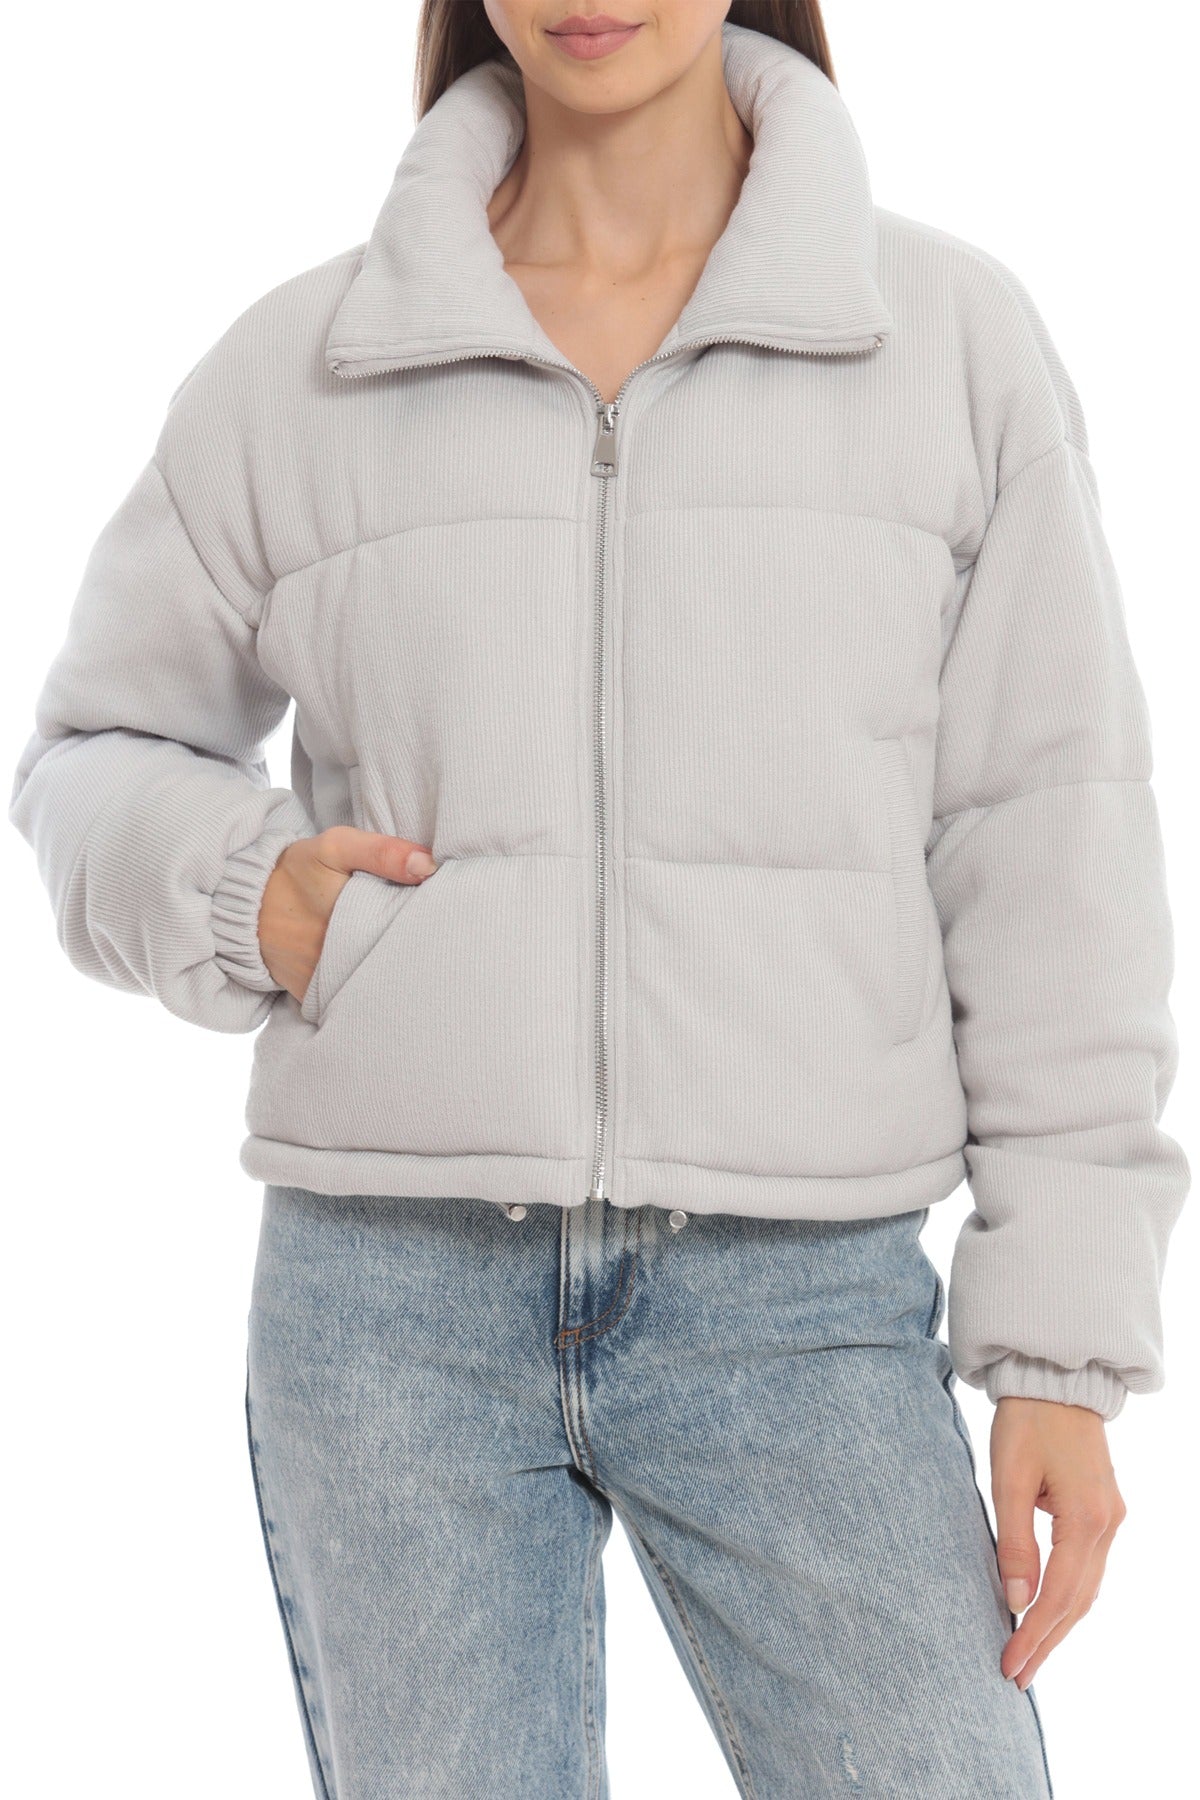 Light grey puffer jacket outerwear coats by Bagatelle for ladies